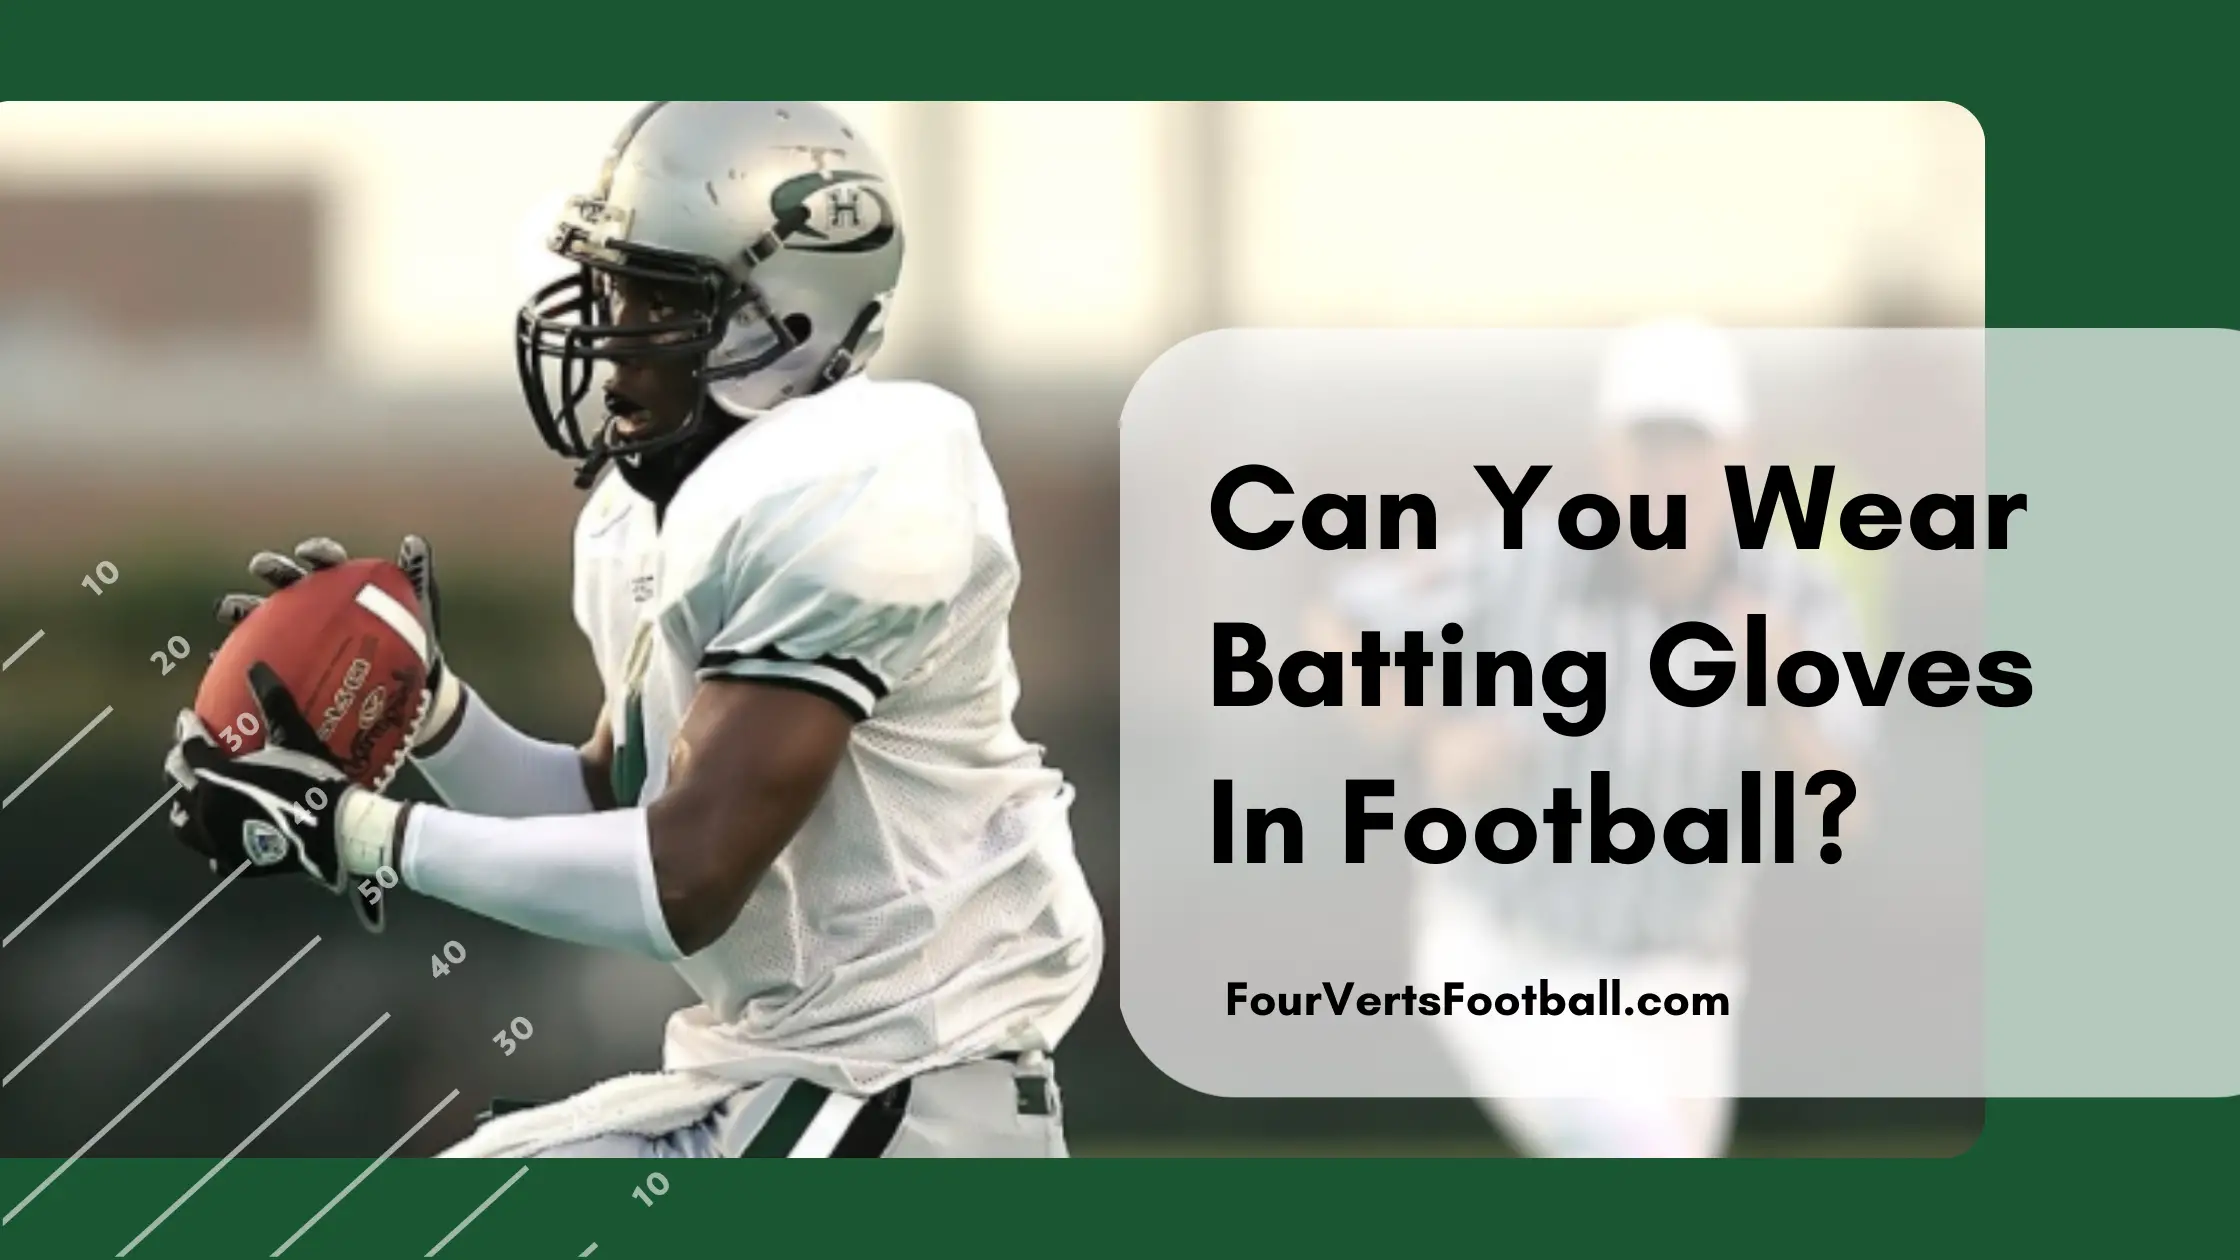 Can You Use Batting Gloves For Football?